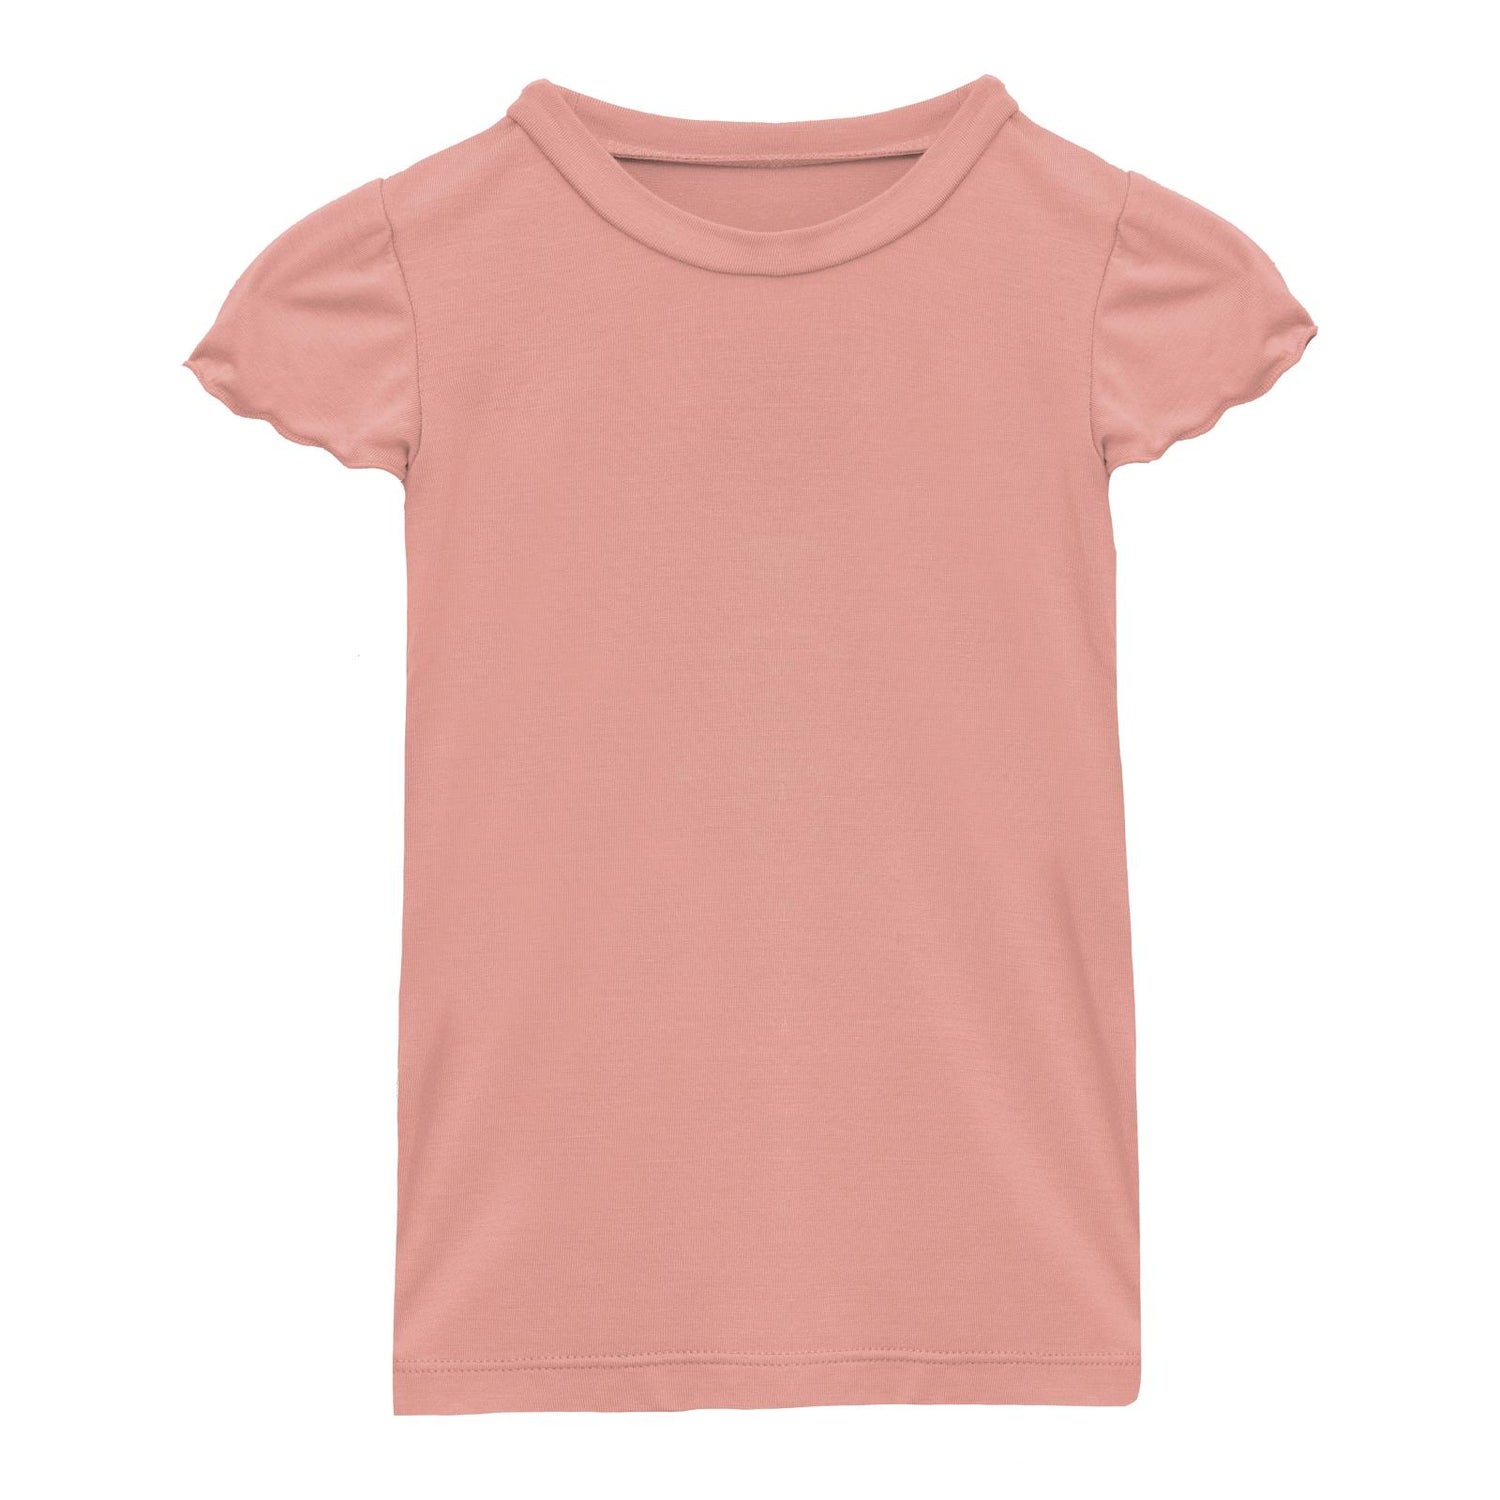 Tailored Fit Flutter Sleeve Tee in Blush